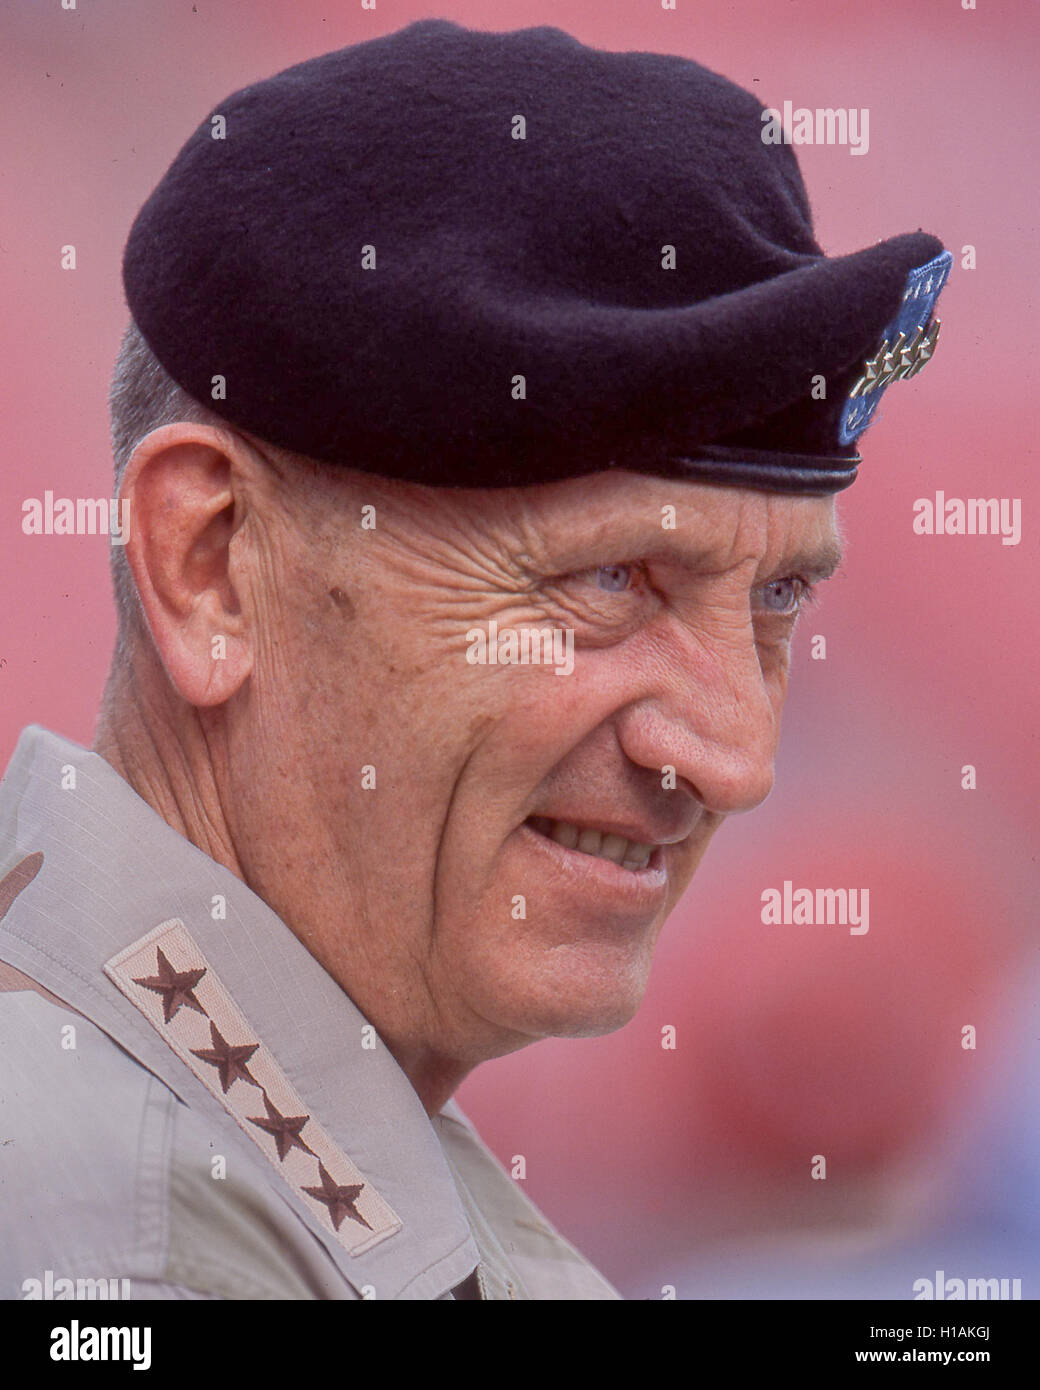 December 8, 2001 - Tampa, Florida, US - Tommy Ray Franks is a retired 4-star United States Army general. His last post was as the Commander of the U.S. Central Command, overseeing U.S. military operations in a 25-country region, including the Middle East. Franks was the U.S. general who led the attack on the Taliban in Afghanistan in response to the September 11 attacks on the World Trade Center and The Pentagon in 2001. He also led the 2003 invasion of Iraq and the overthrow of Saddam Hussein. Born June 17, 1945, he retired on July 7, 2003. (Credit Image: © Arnold Drapkin via ZUMA Wire) Stock Photo